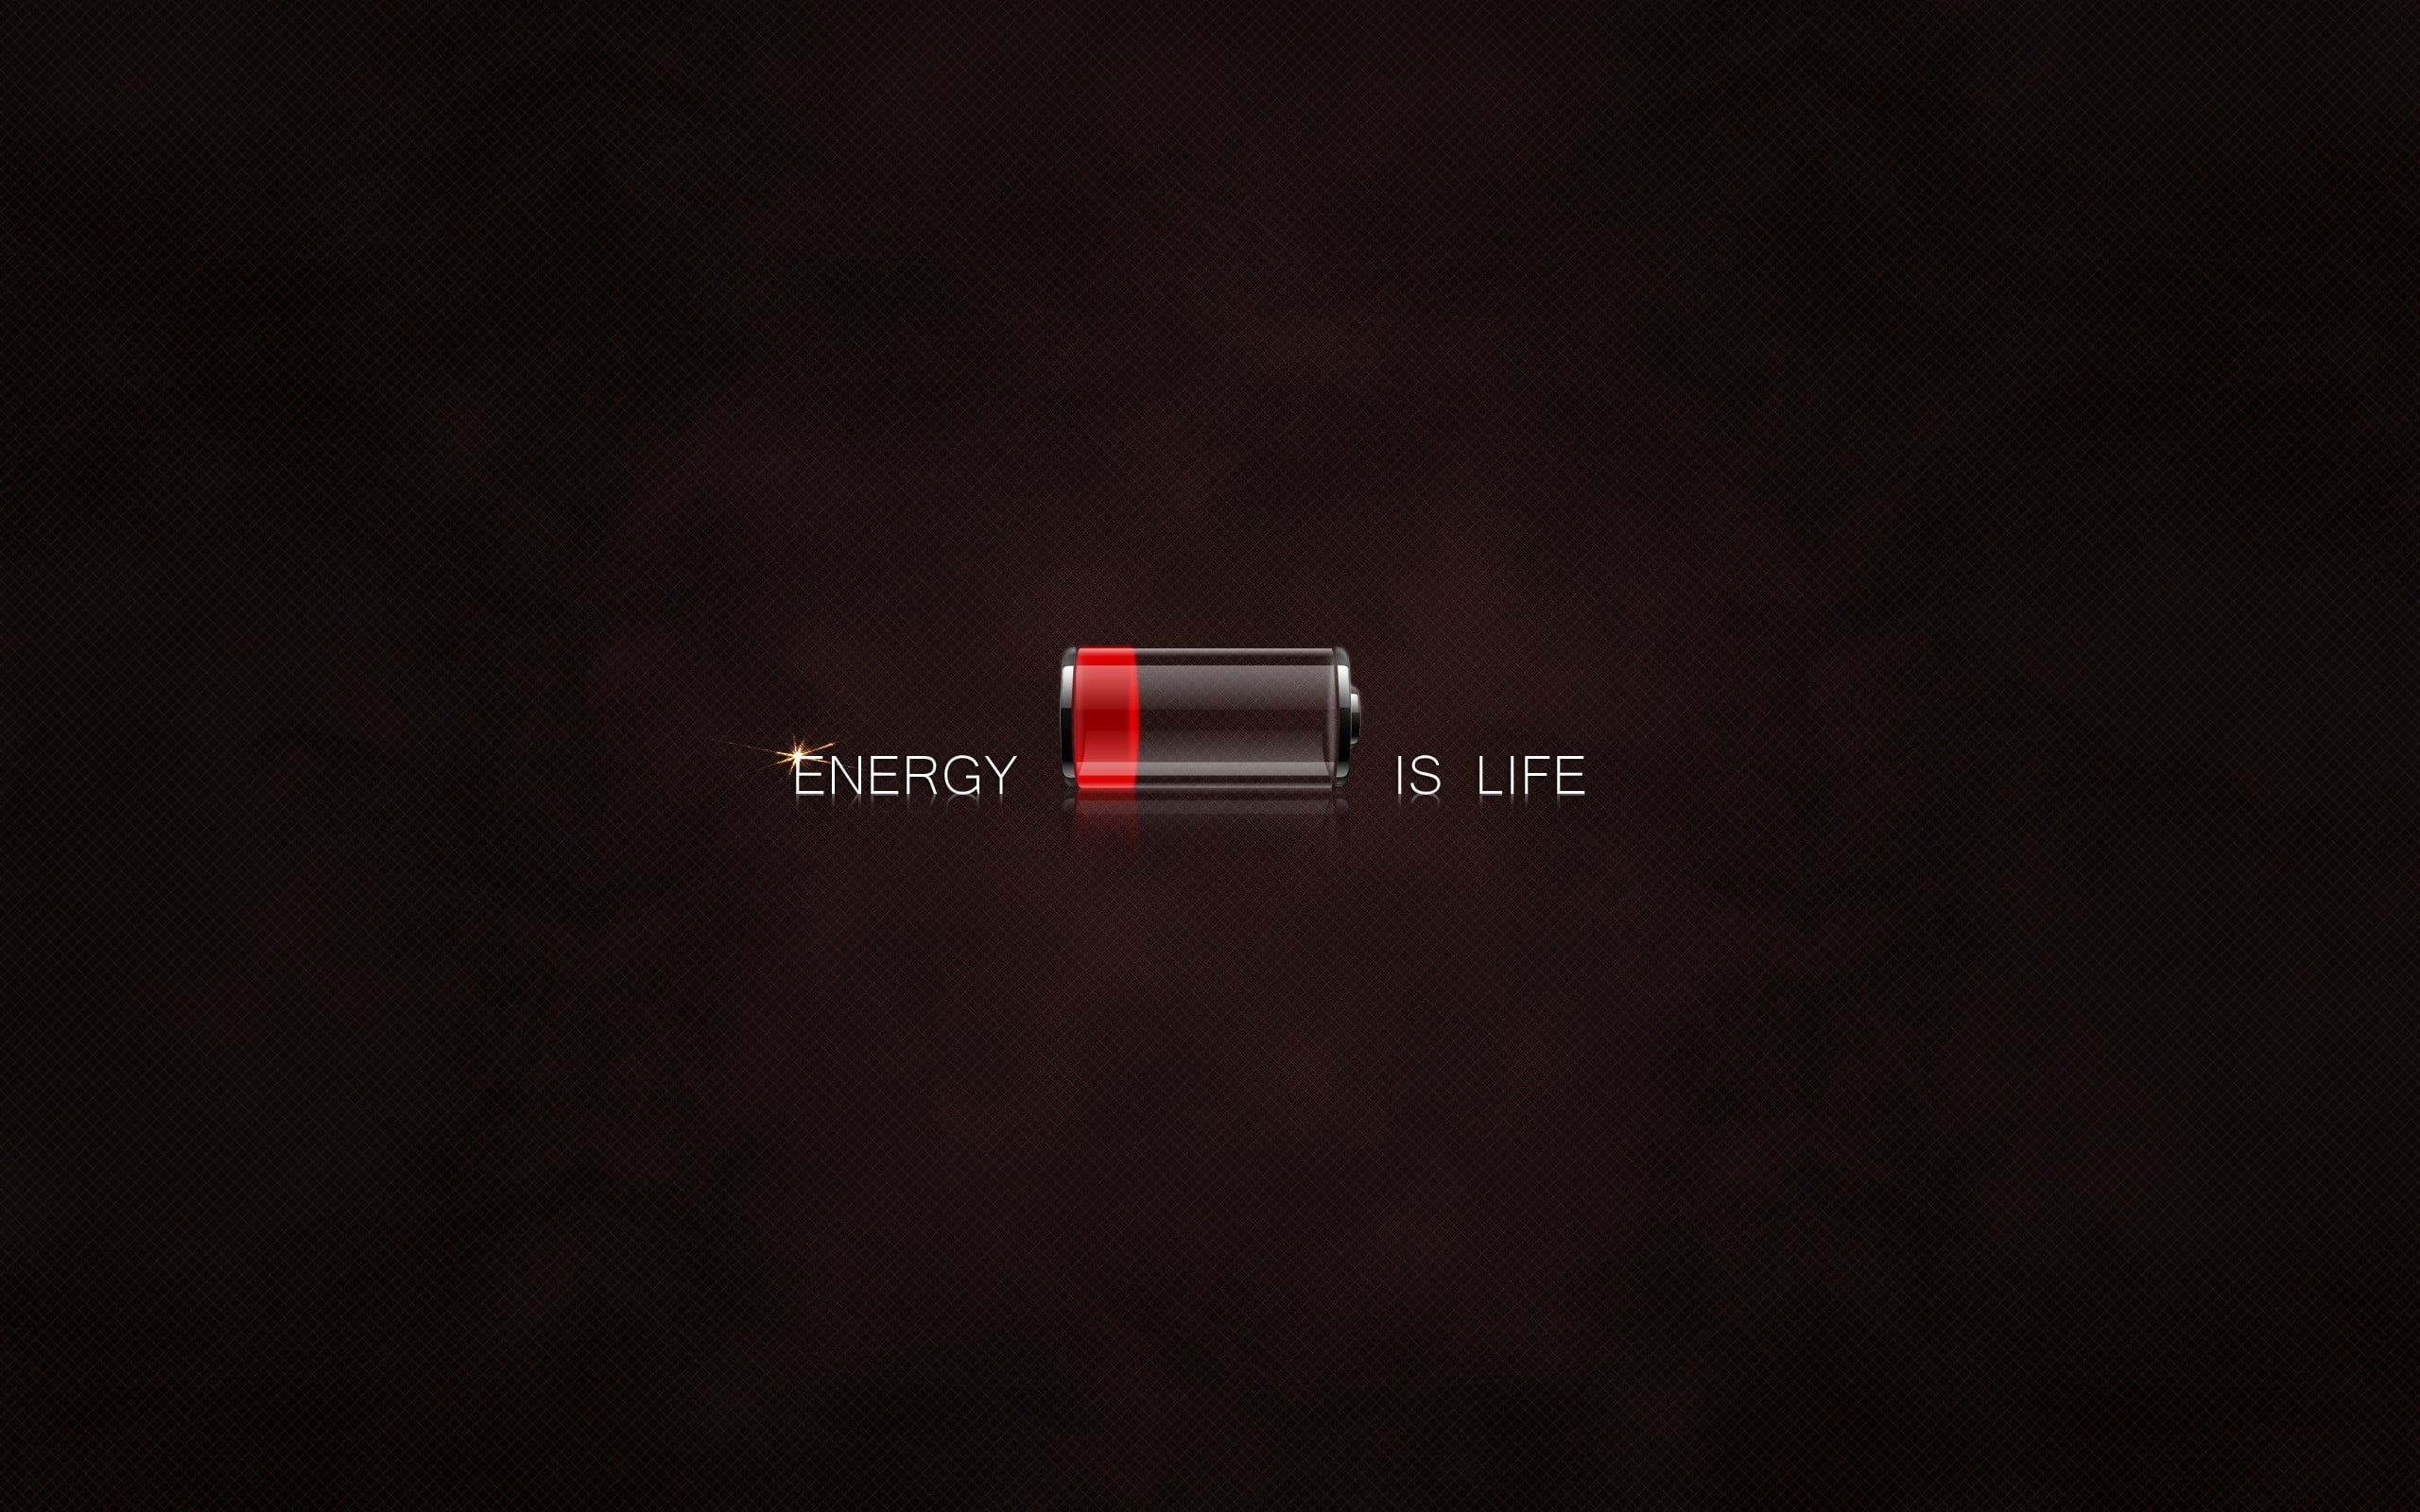 Energy is life illustration, low battery, life, quote, minimalism